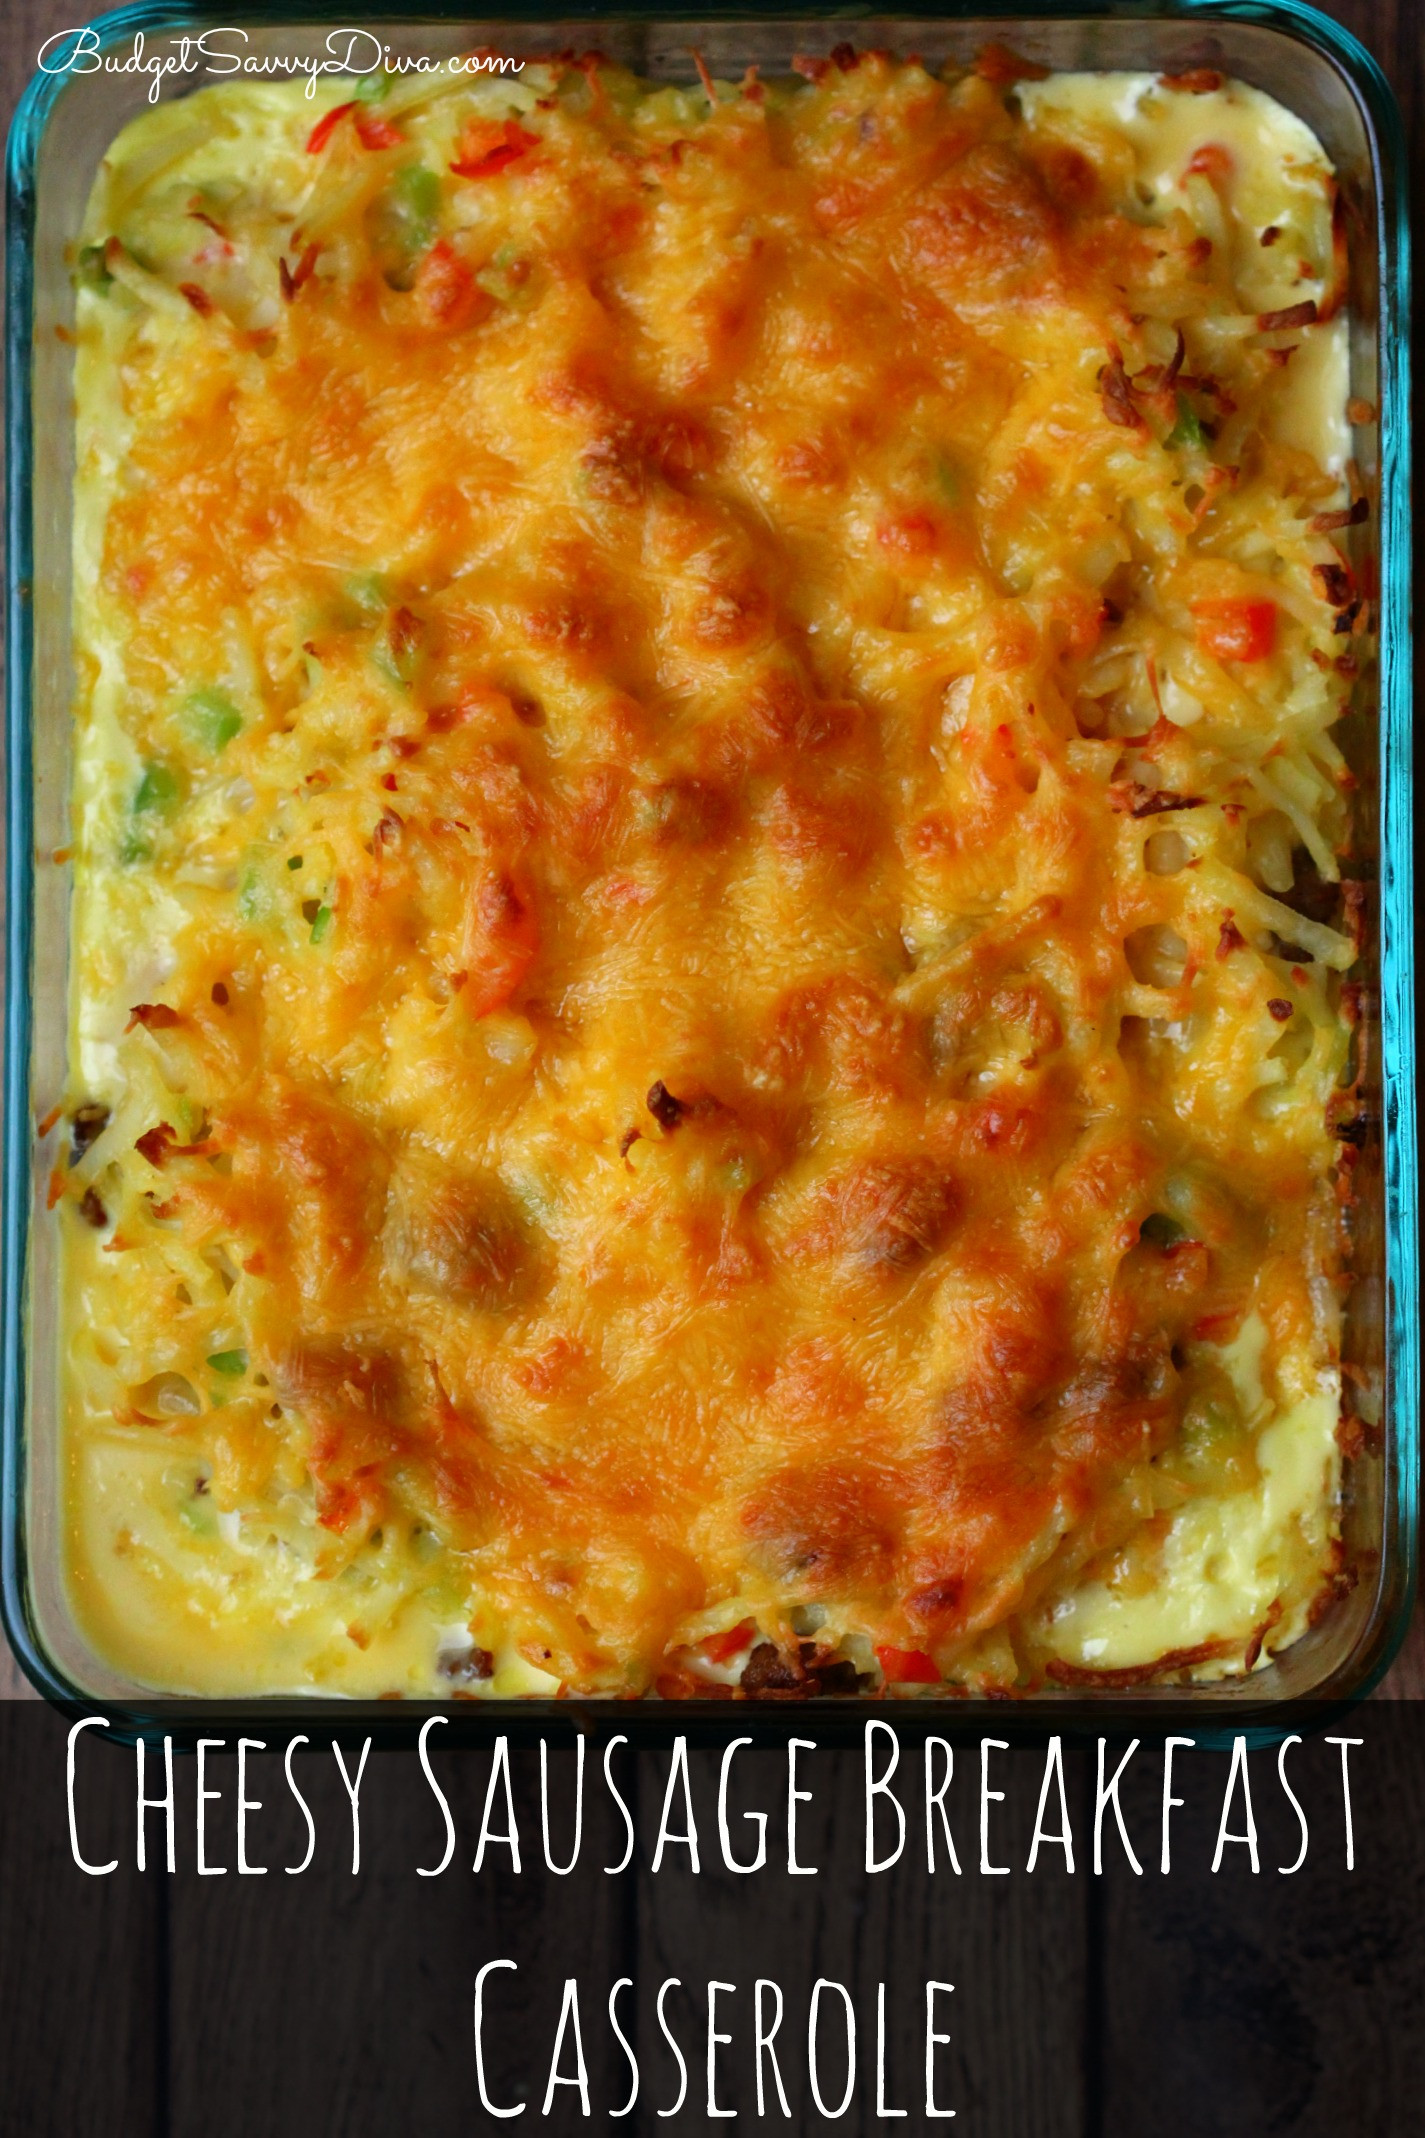 Breakfast Casseroles With Sausage
 Cheesy Sausage Breakfast Casserole Recipe Bud Savvy Diva